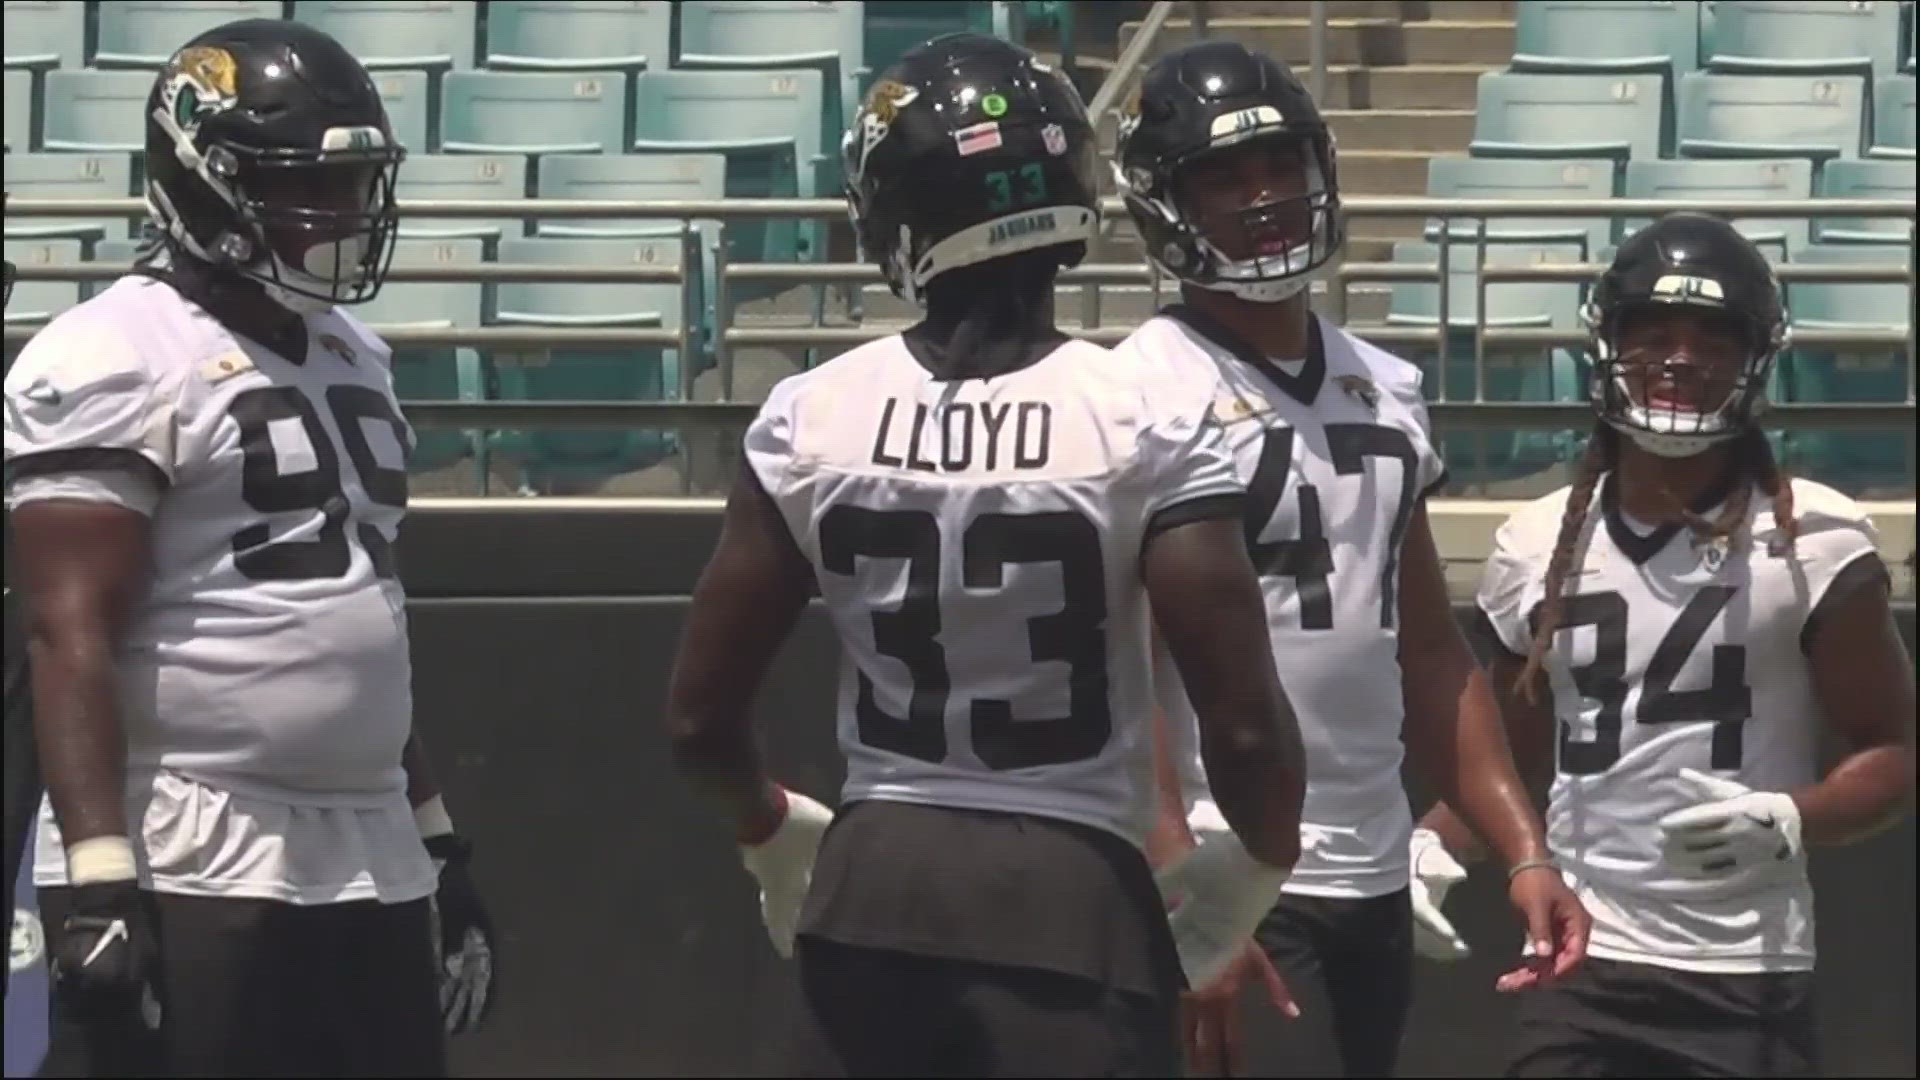 Lloyd got off to a fast start in his rookie season with the Jags, but struggled at times down the stretch. He's ready to take that next step this coming season.